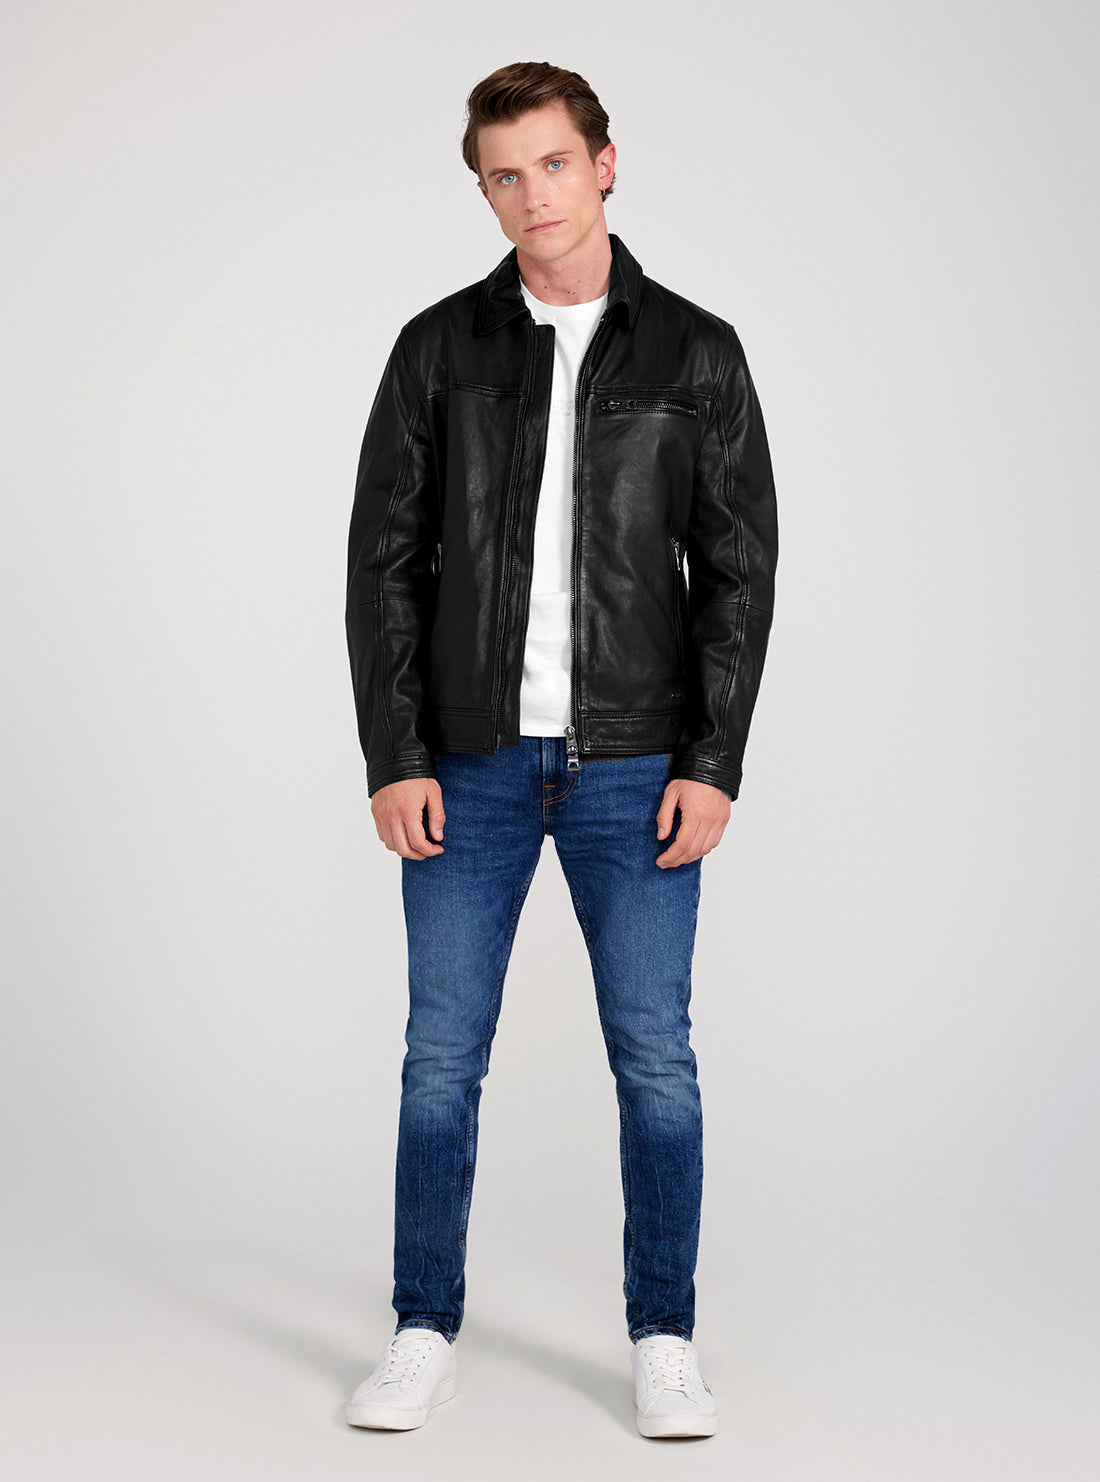 GUESS Black Leather Jacket full view